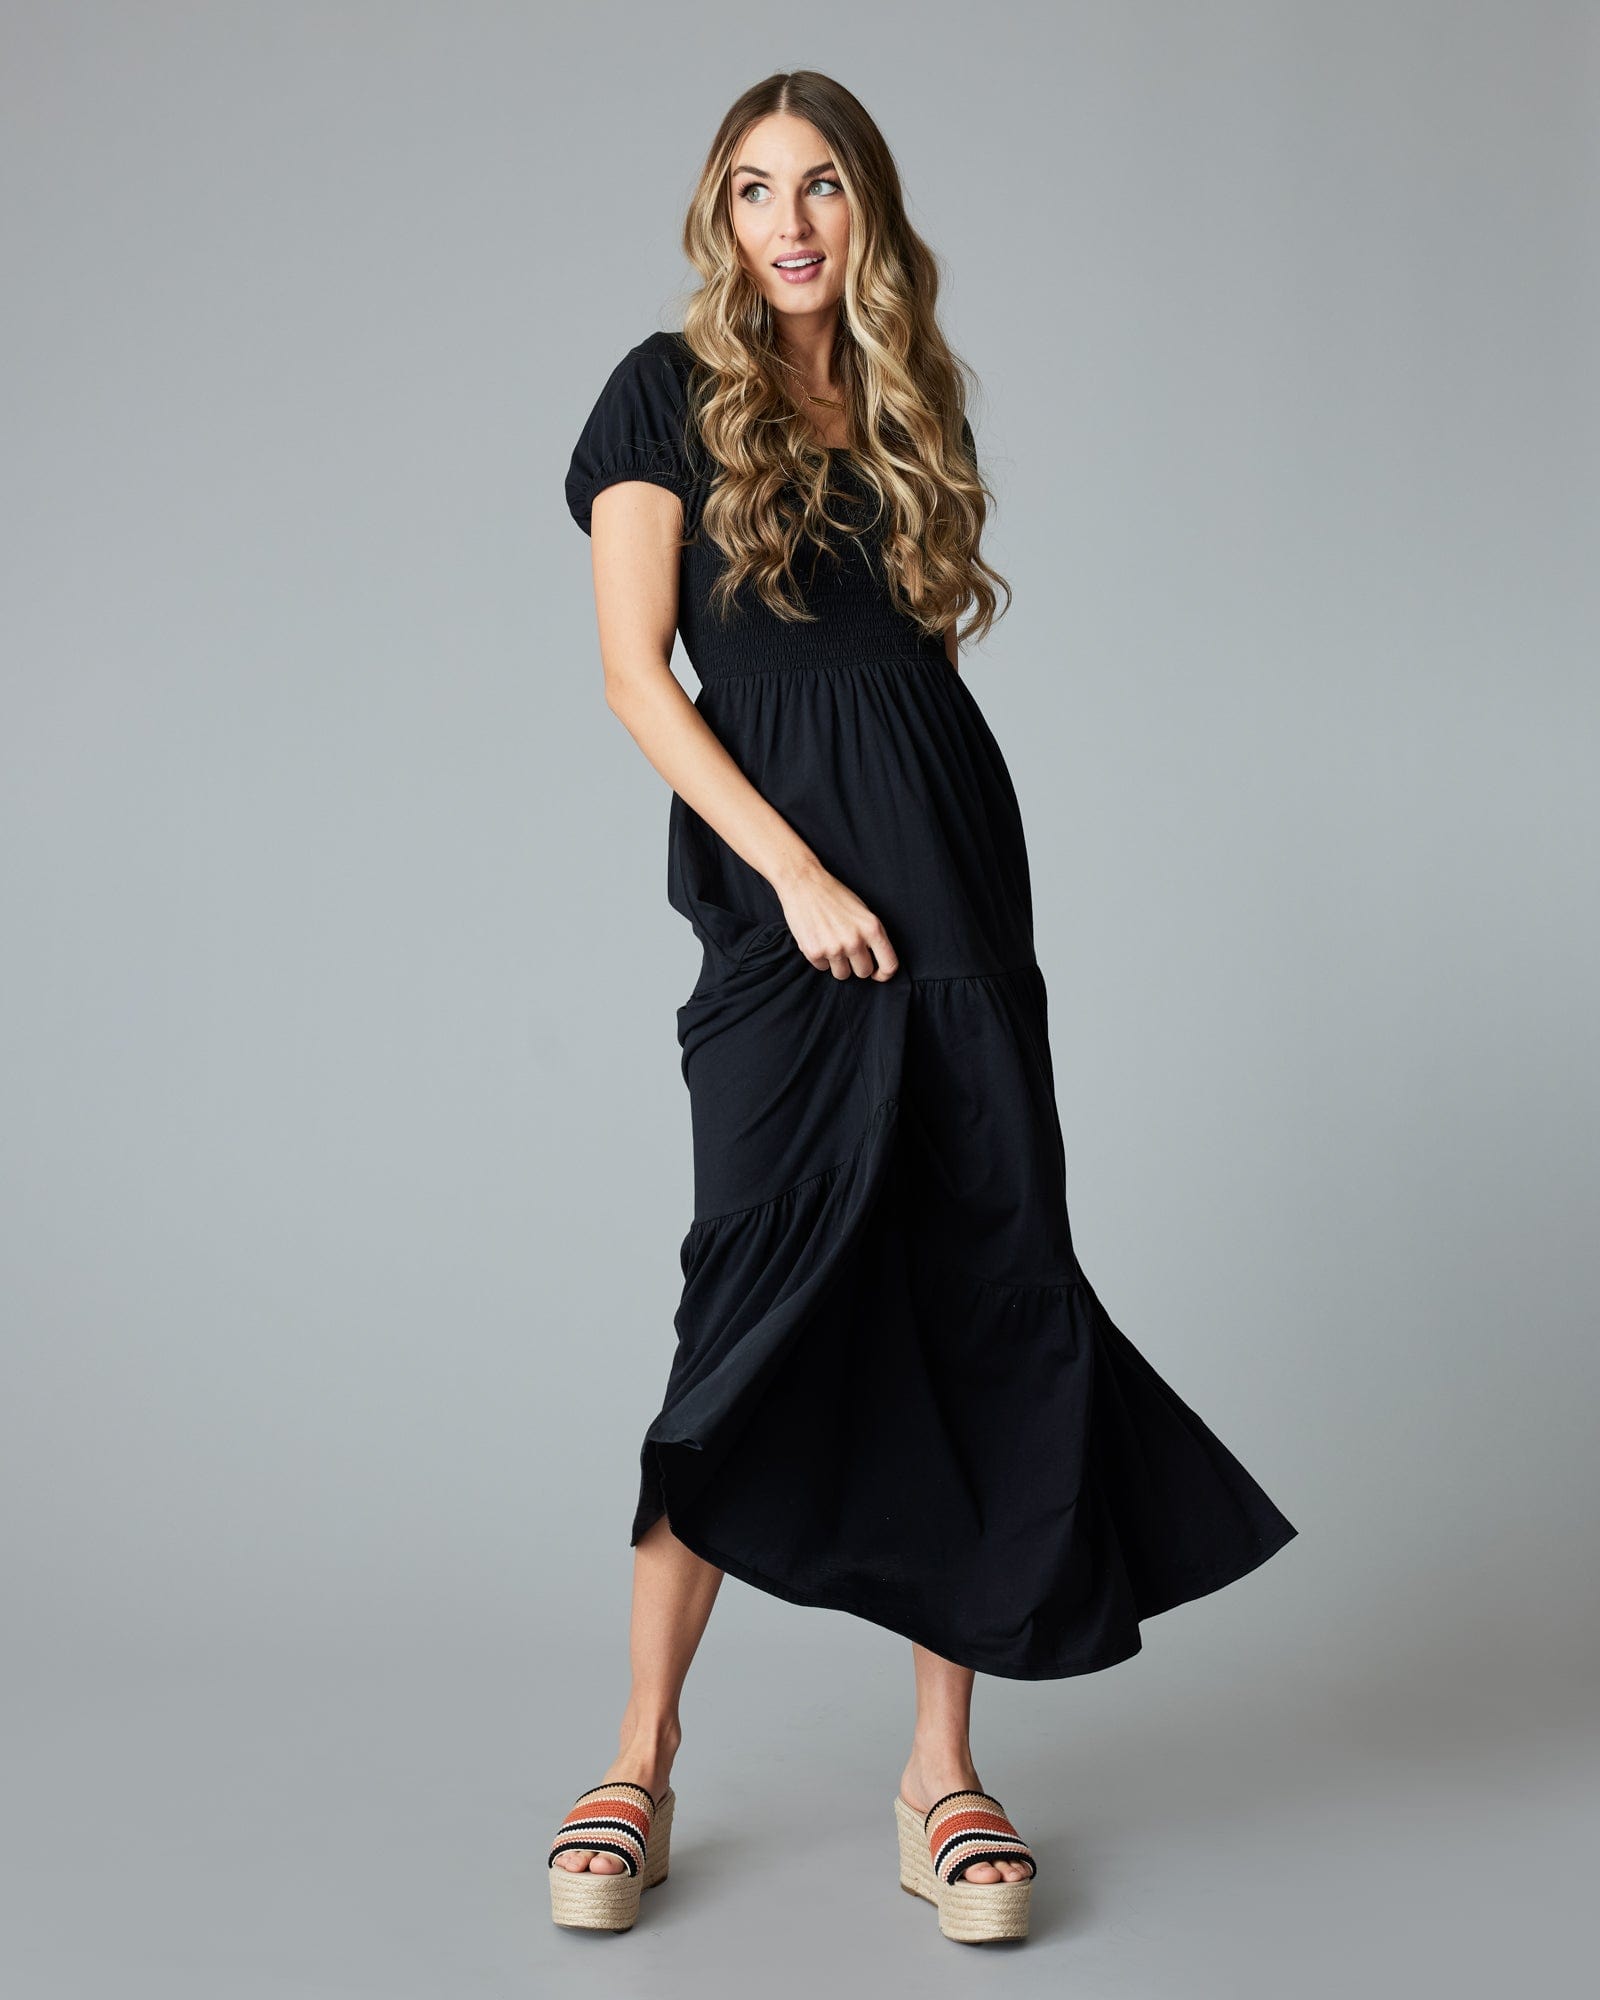 Woman in a black, short sleeved, maxi dress